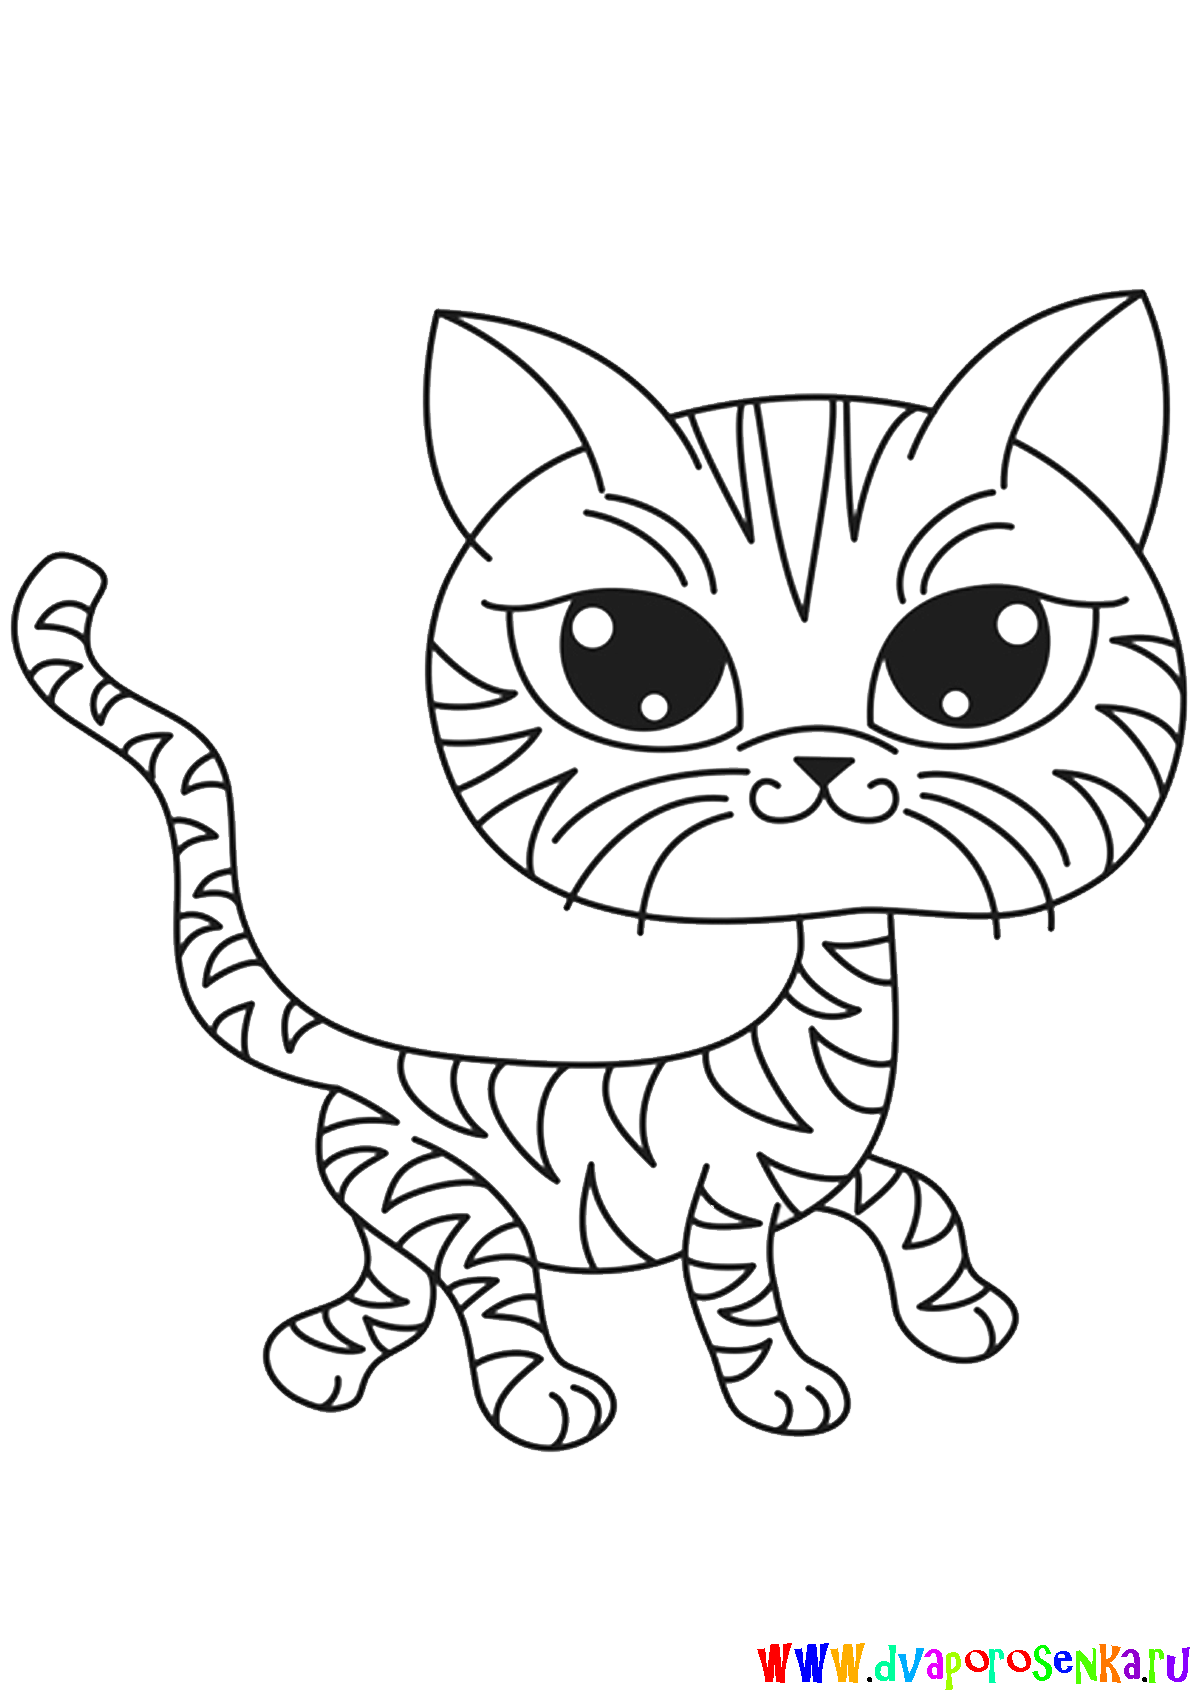 Fat cat coloring pages for kids